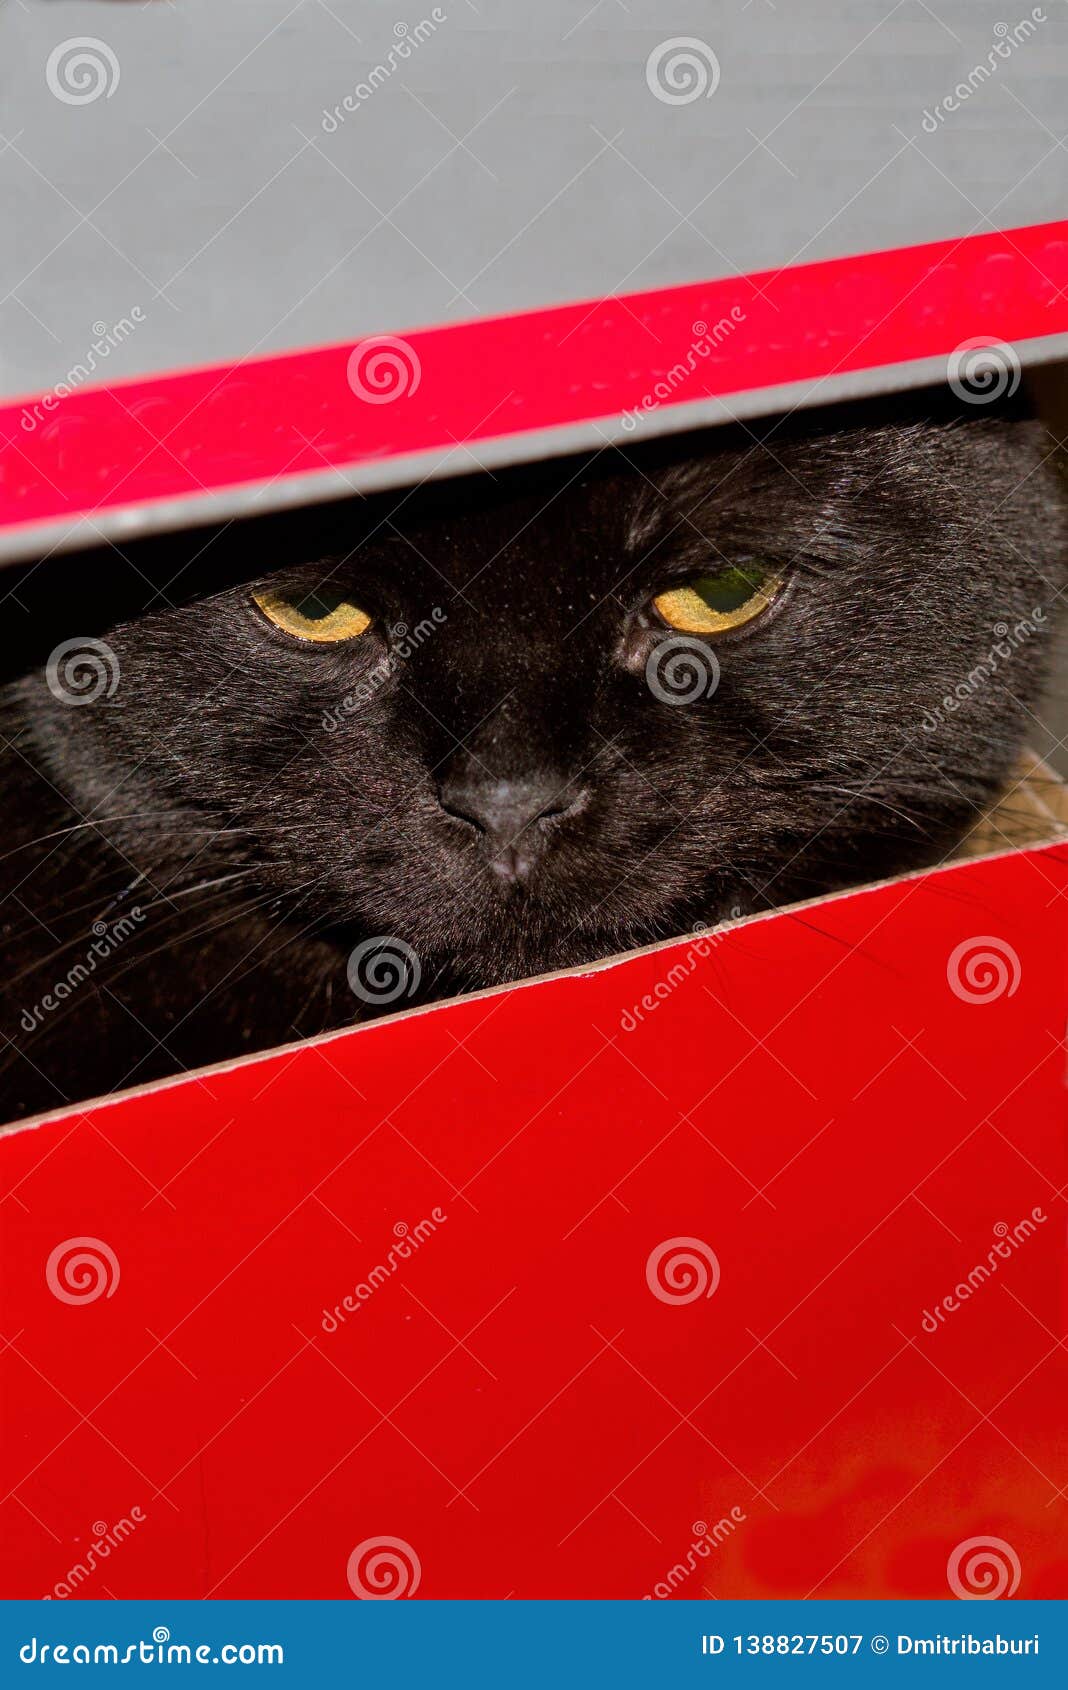 Chic Black British Cat In A Red Shoe Box. Stock Image Image of